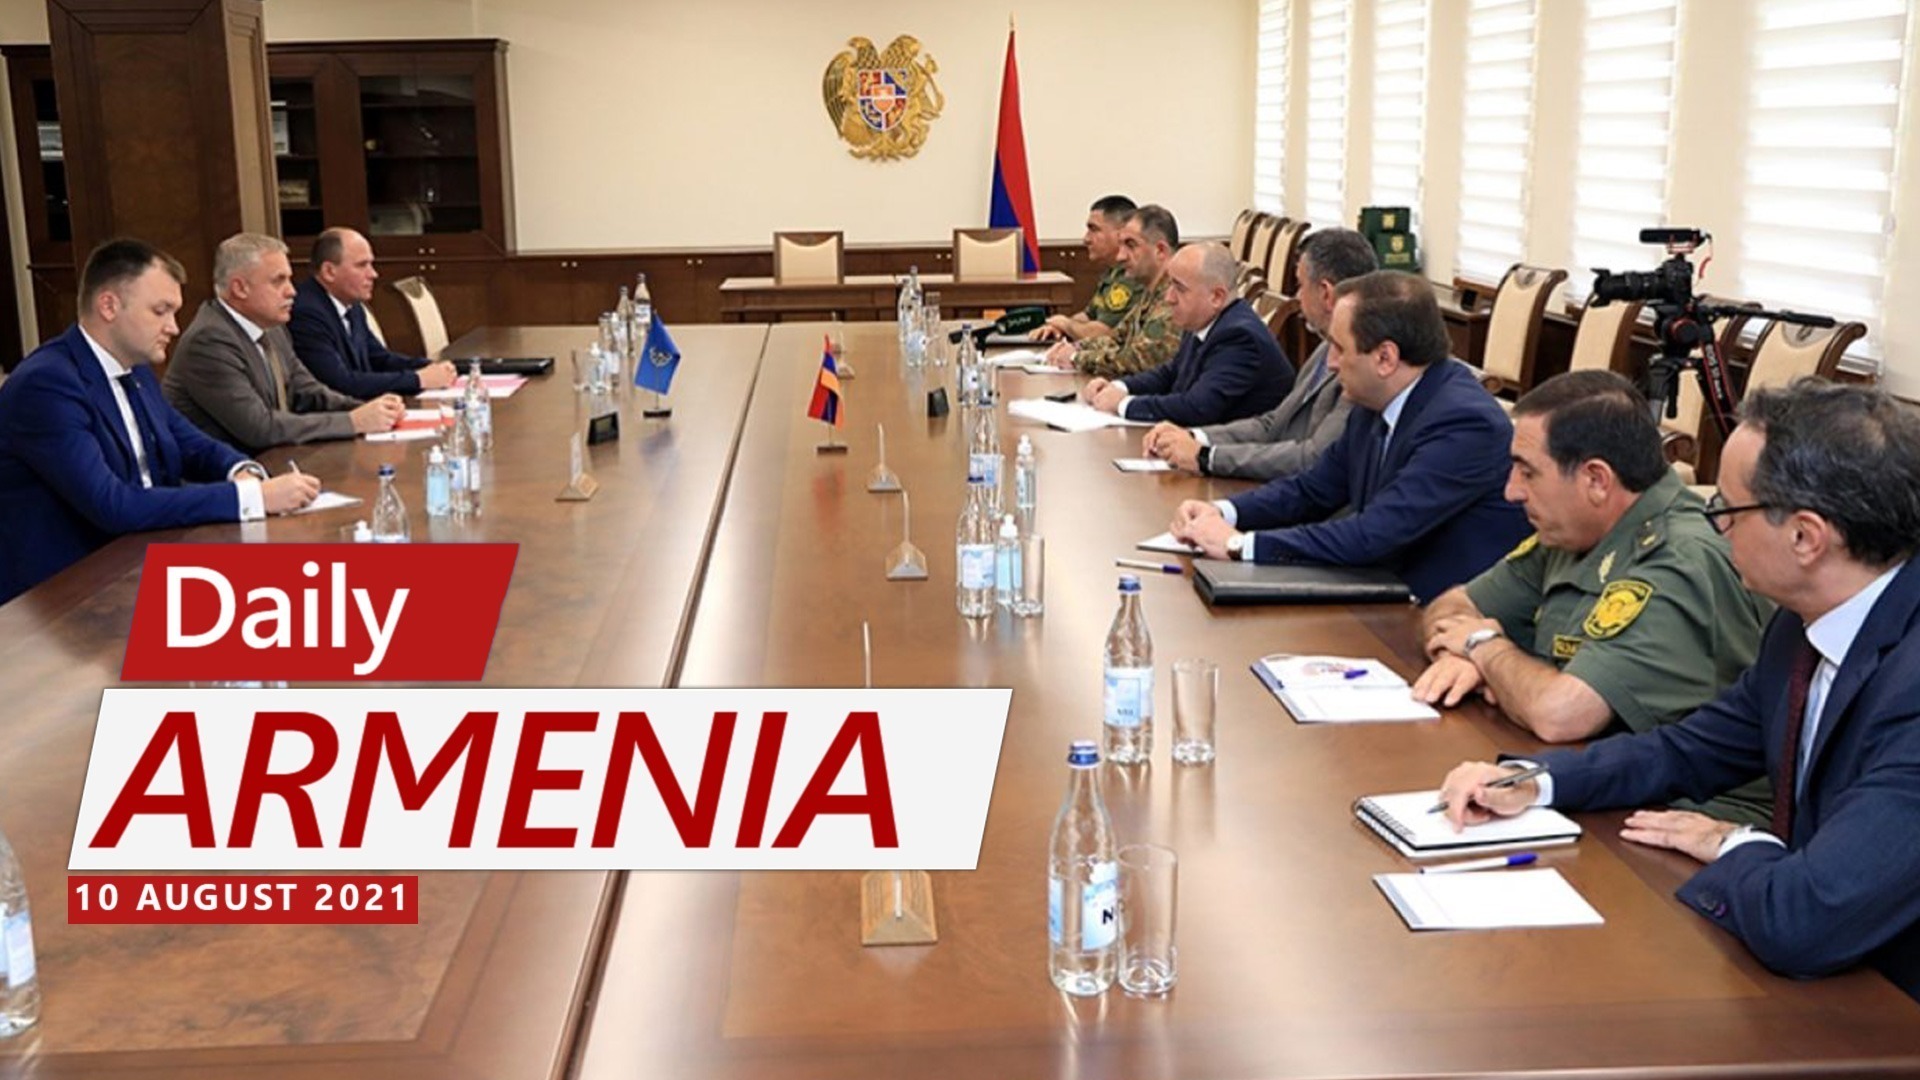 “Armenia’s patience is not limitless,” defense minister tells head of Eurasian military alliance